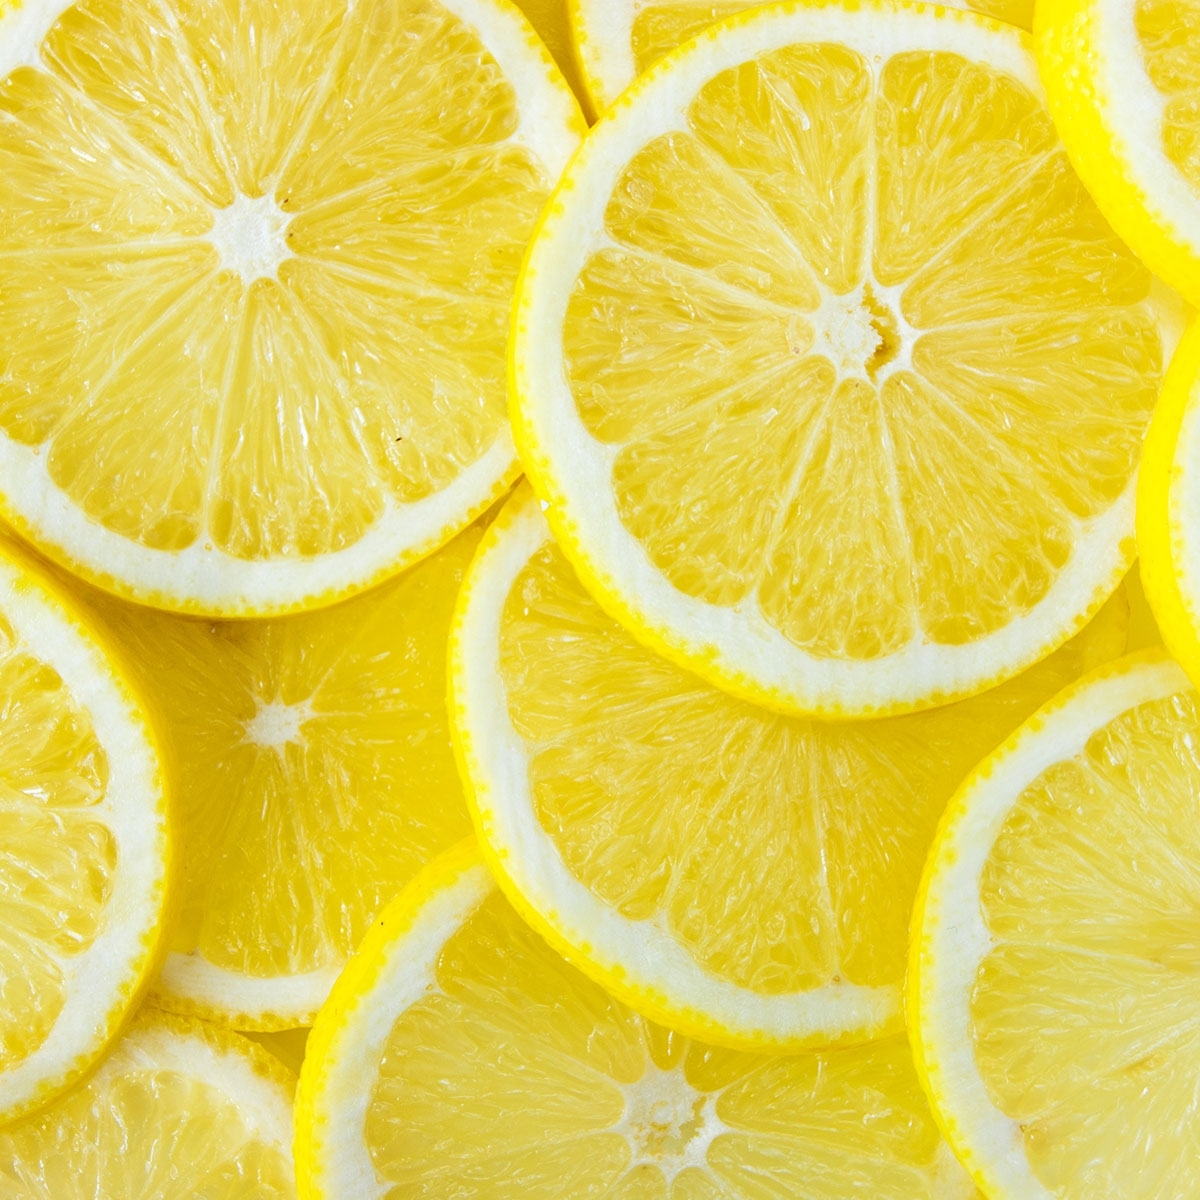 National Lemon Juice Day - August 29, 2019 | National Today intended for National Foods Day Calendar August